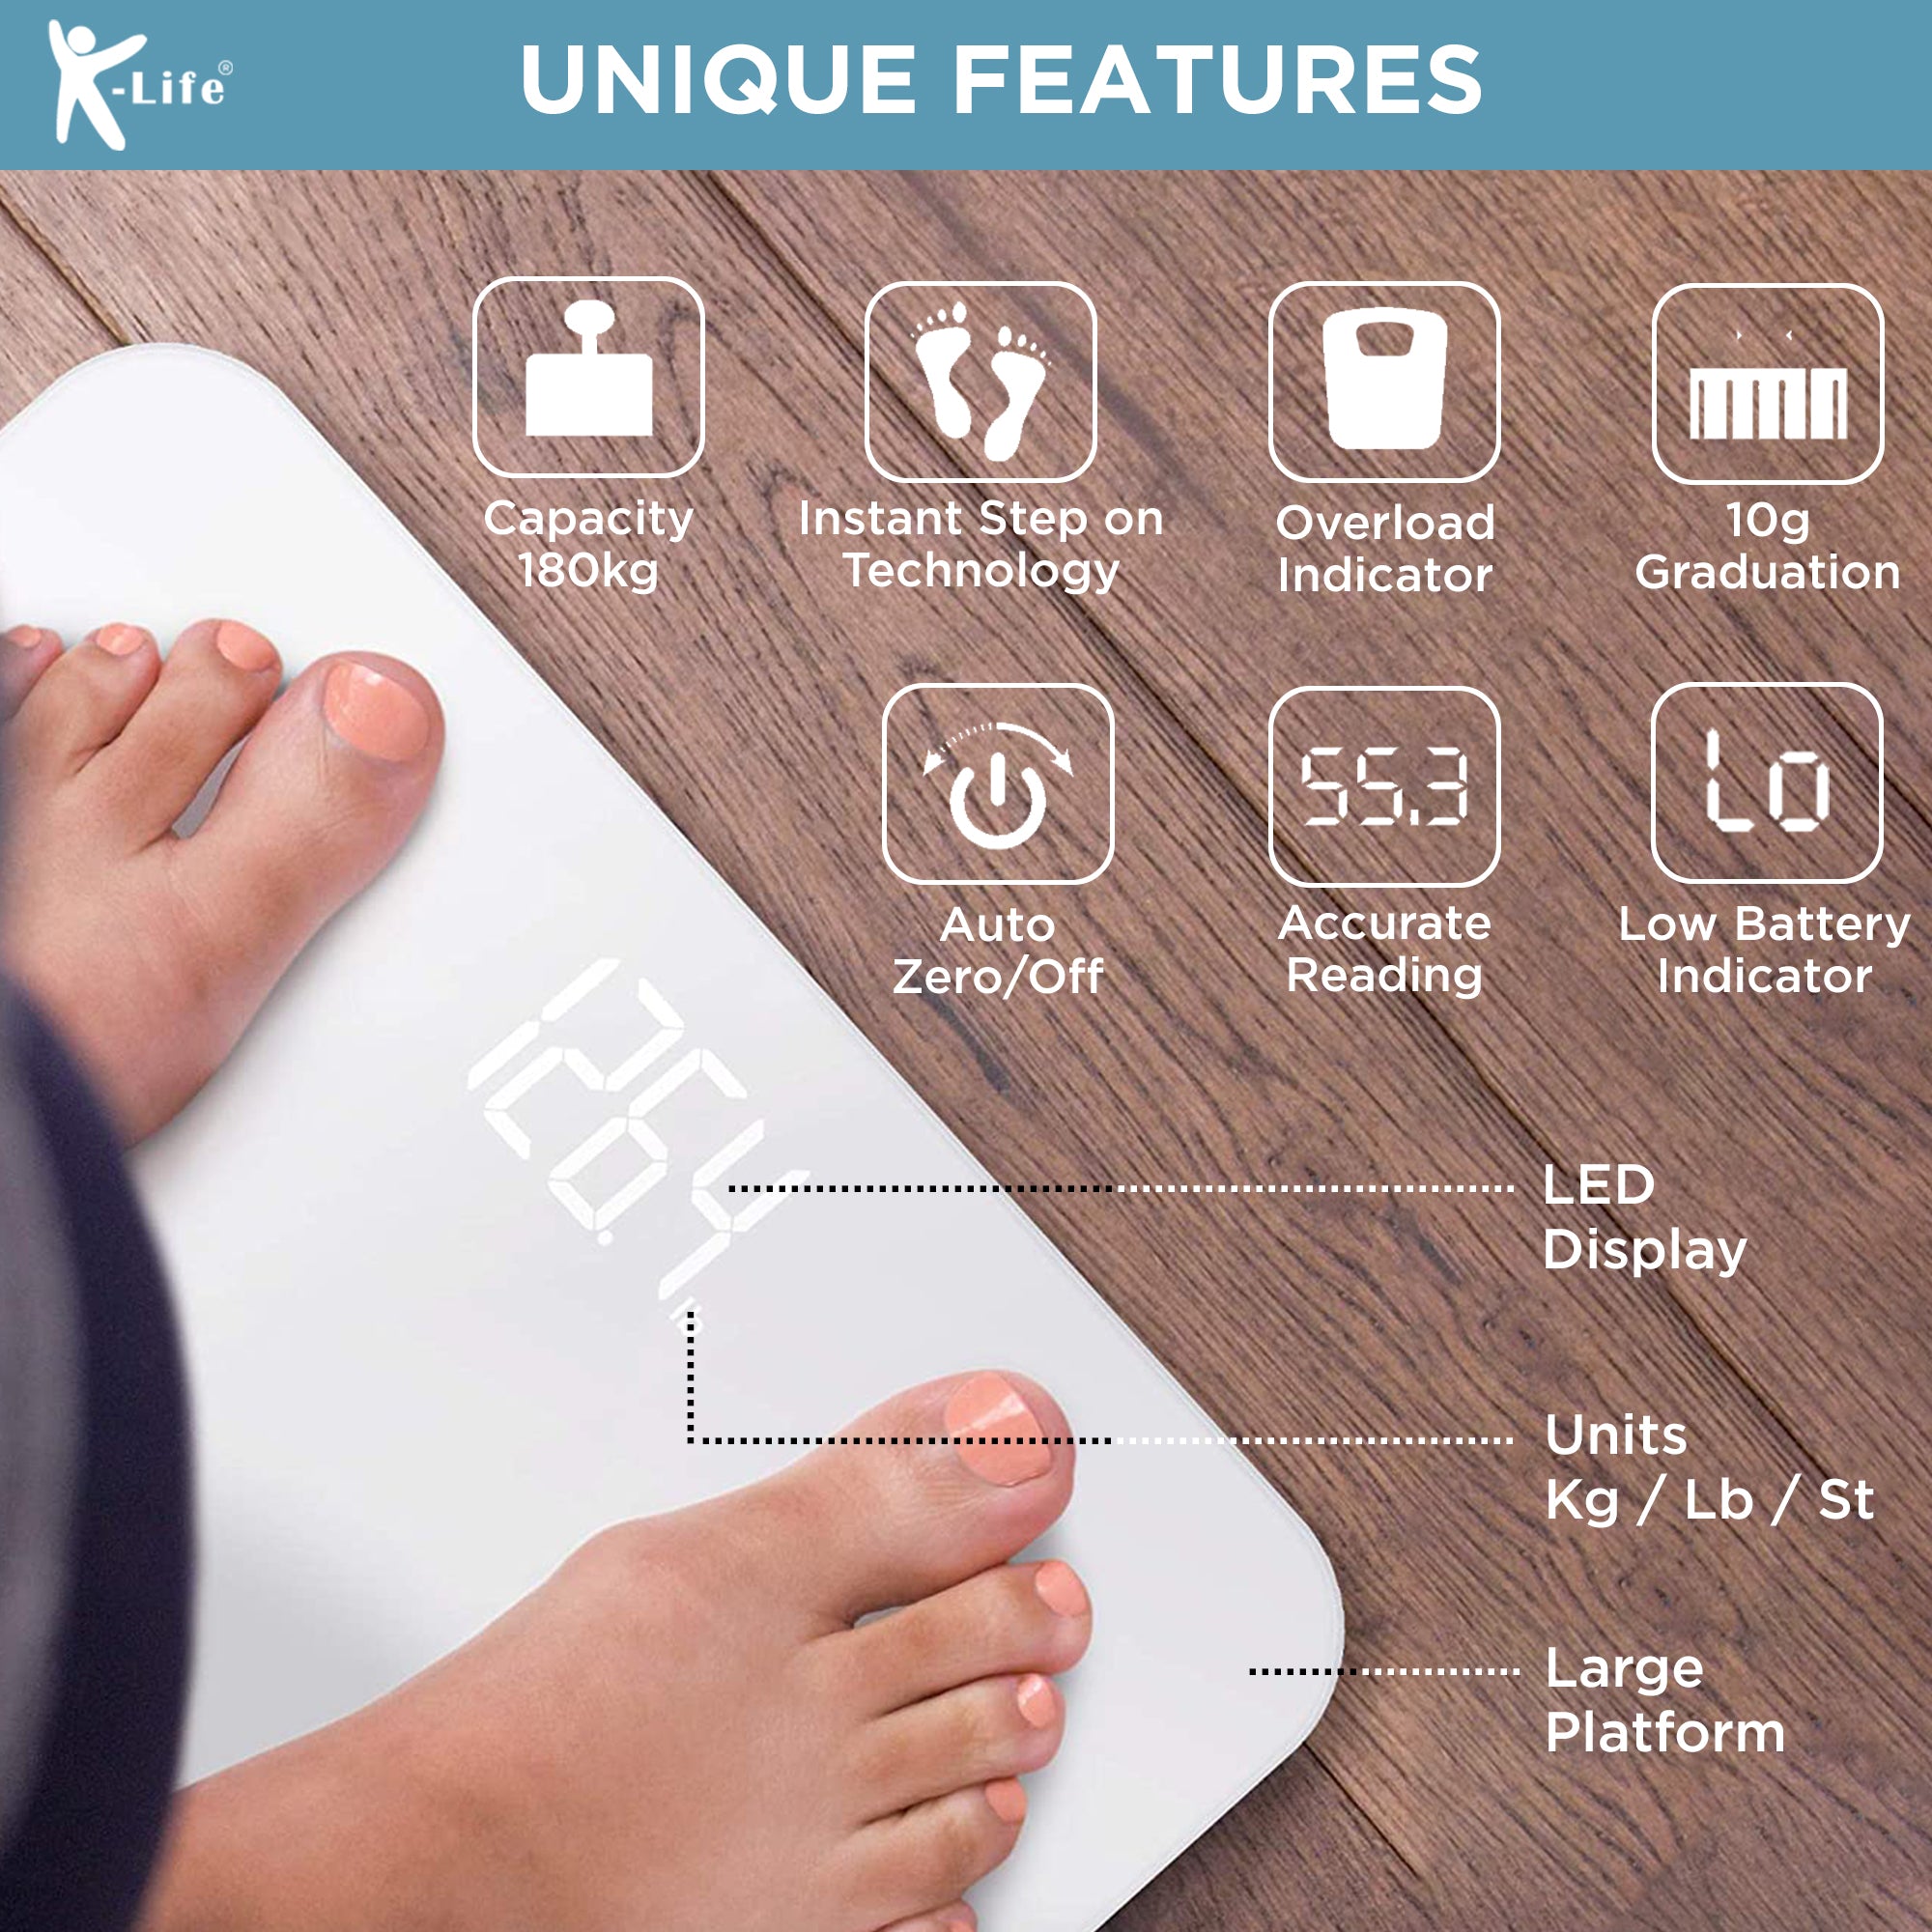 K-Life WS-103 Digital Personal Electronic Body Weight Machine for Human Body 180kg Capacity Weighing Scale, White……